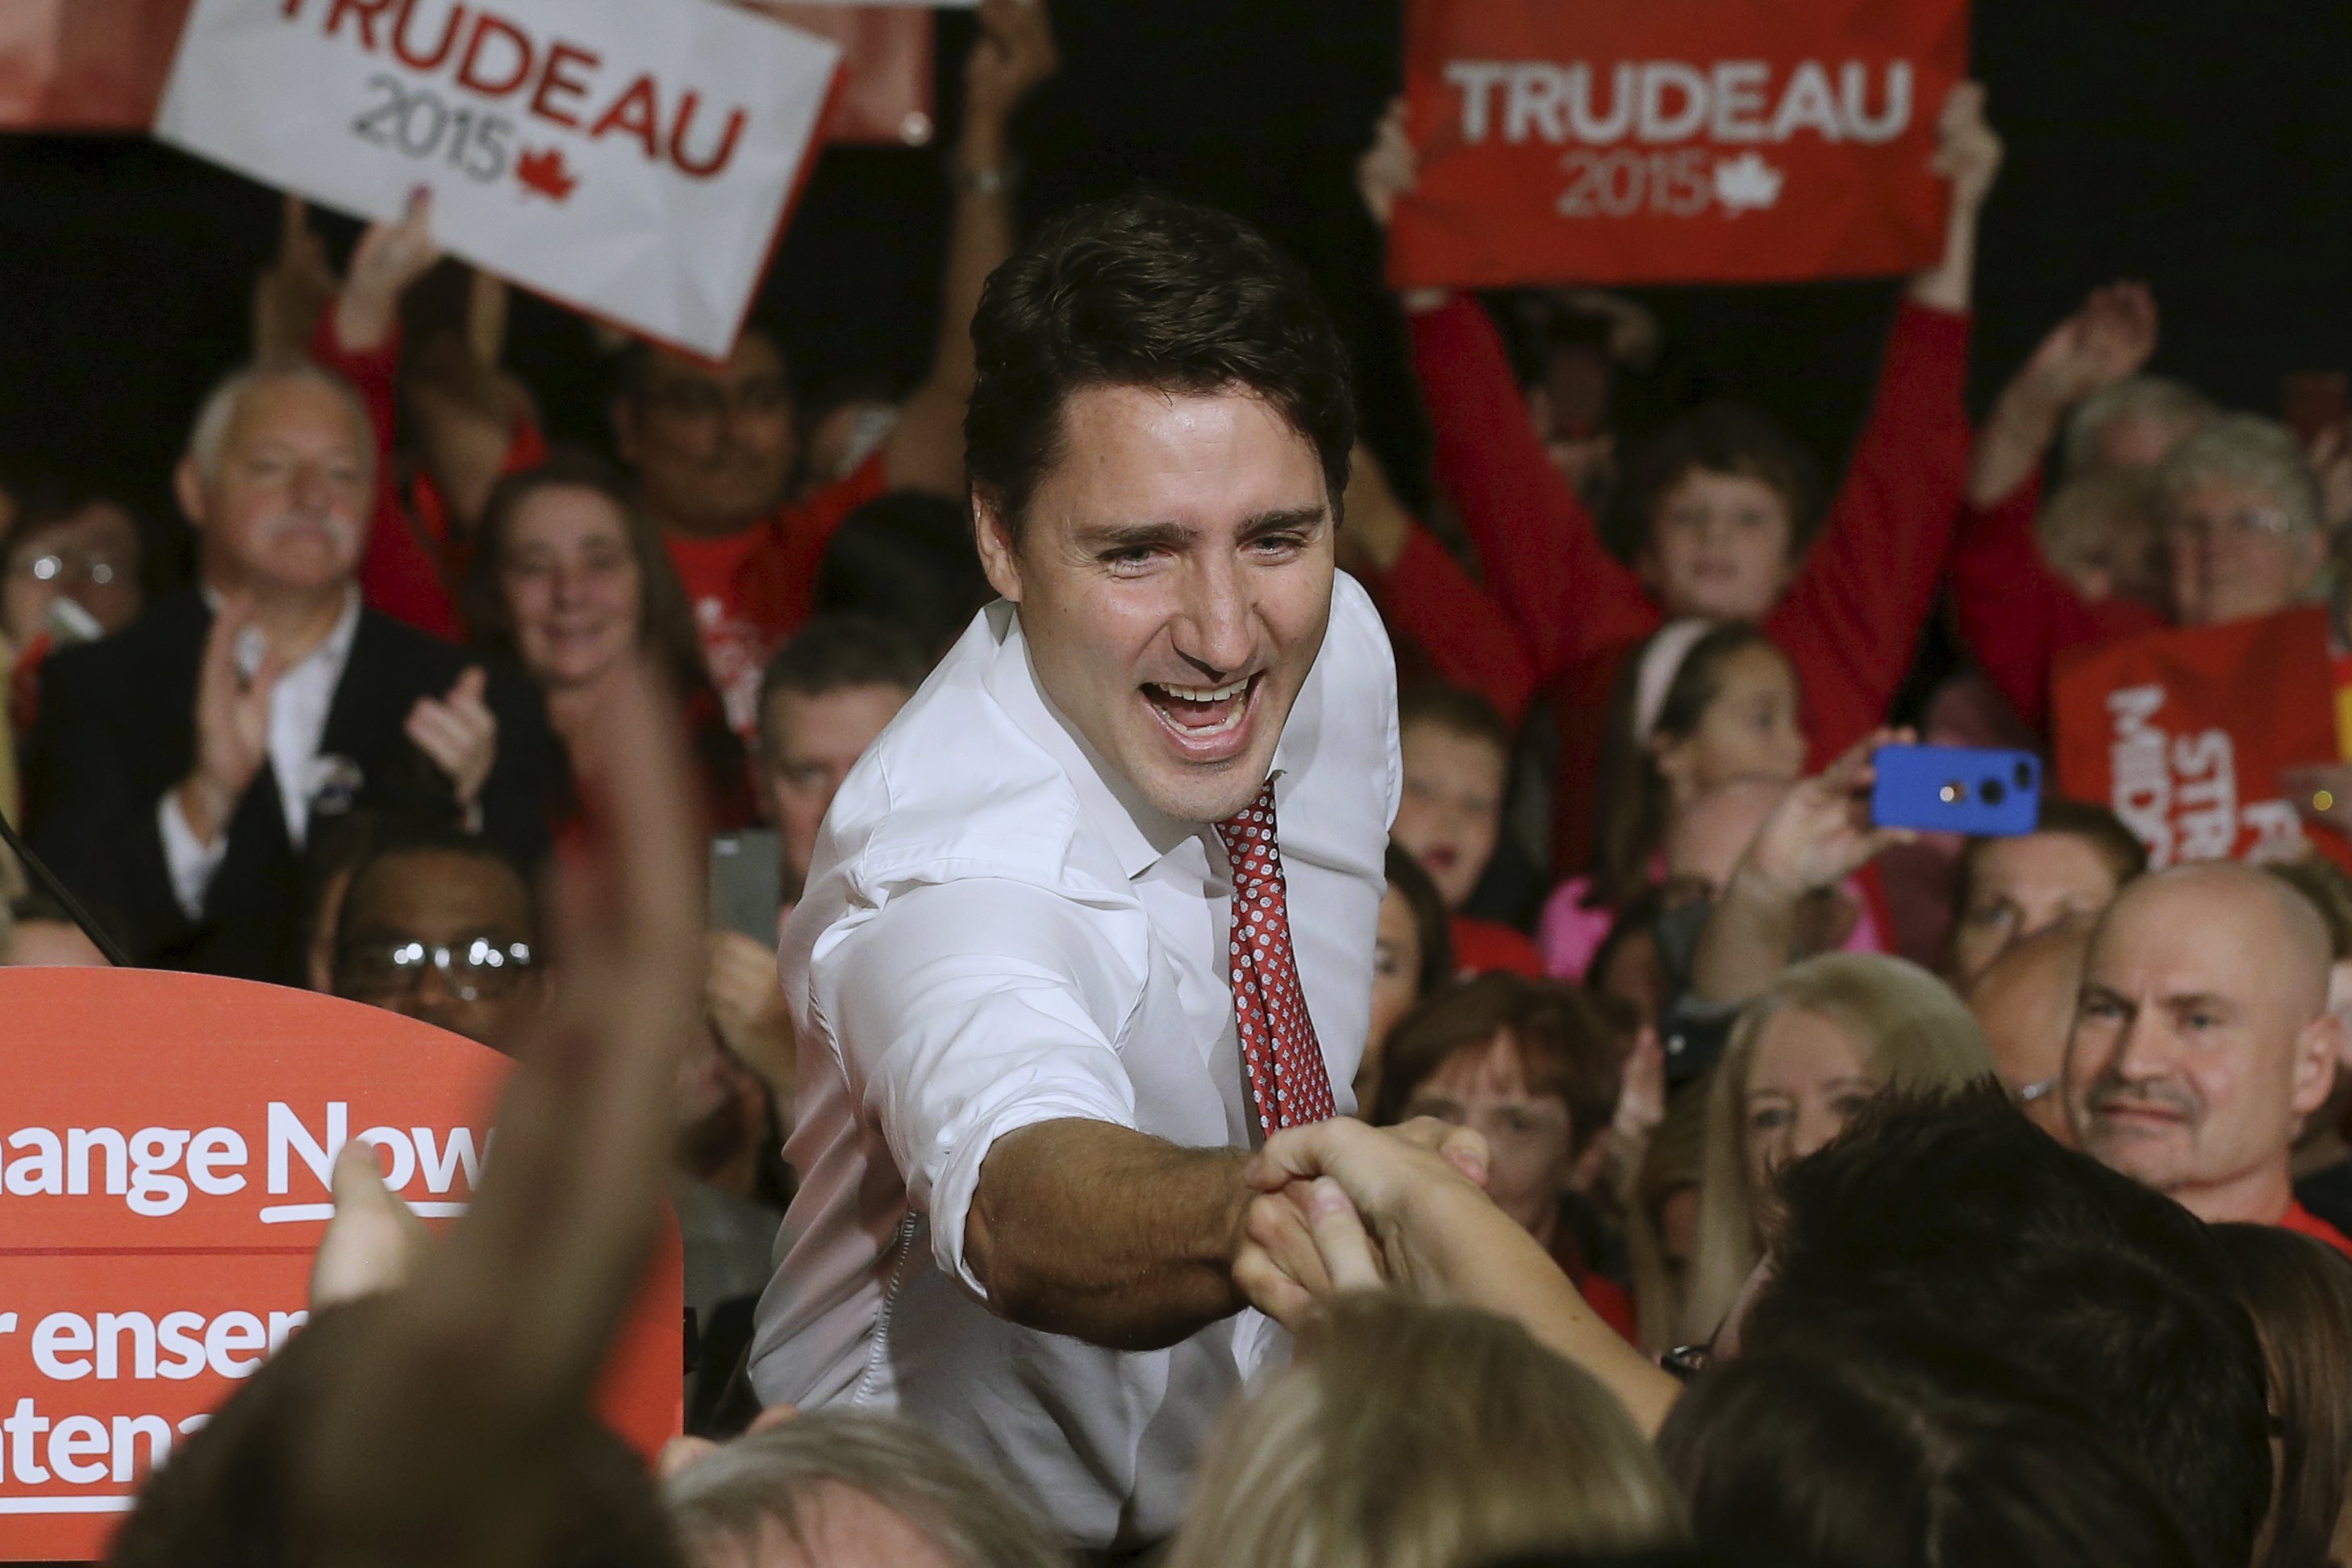 Justin Trudeau attends a campaign rally in Halifax, Nova Scotia, on Oct. 17, 2015.